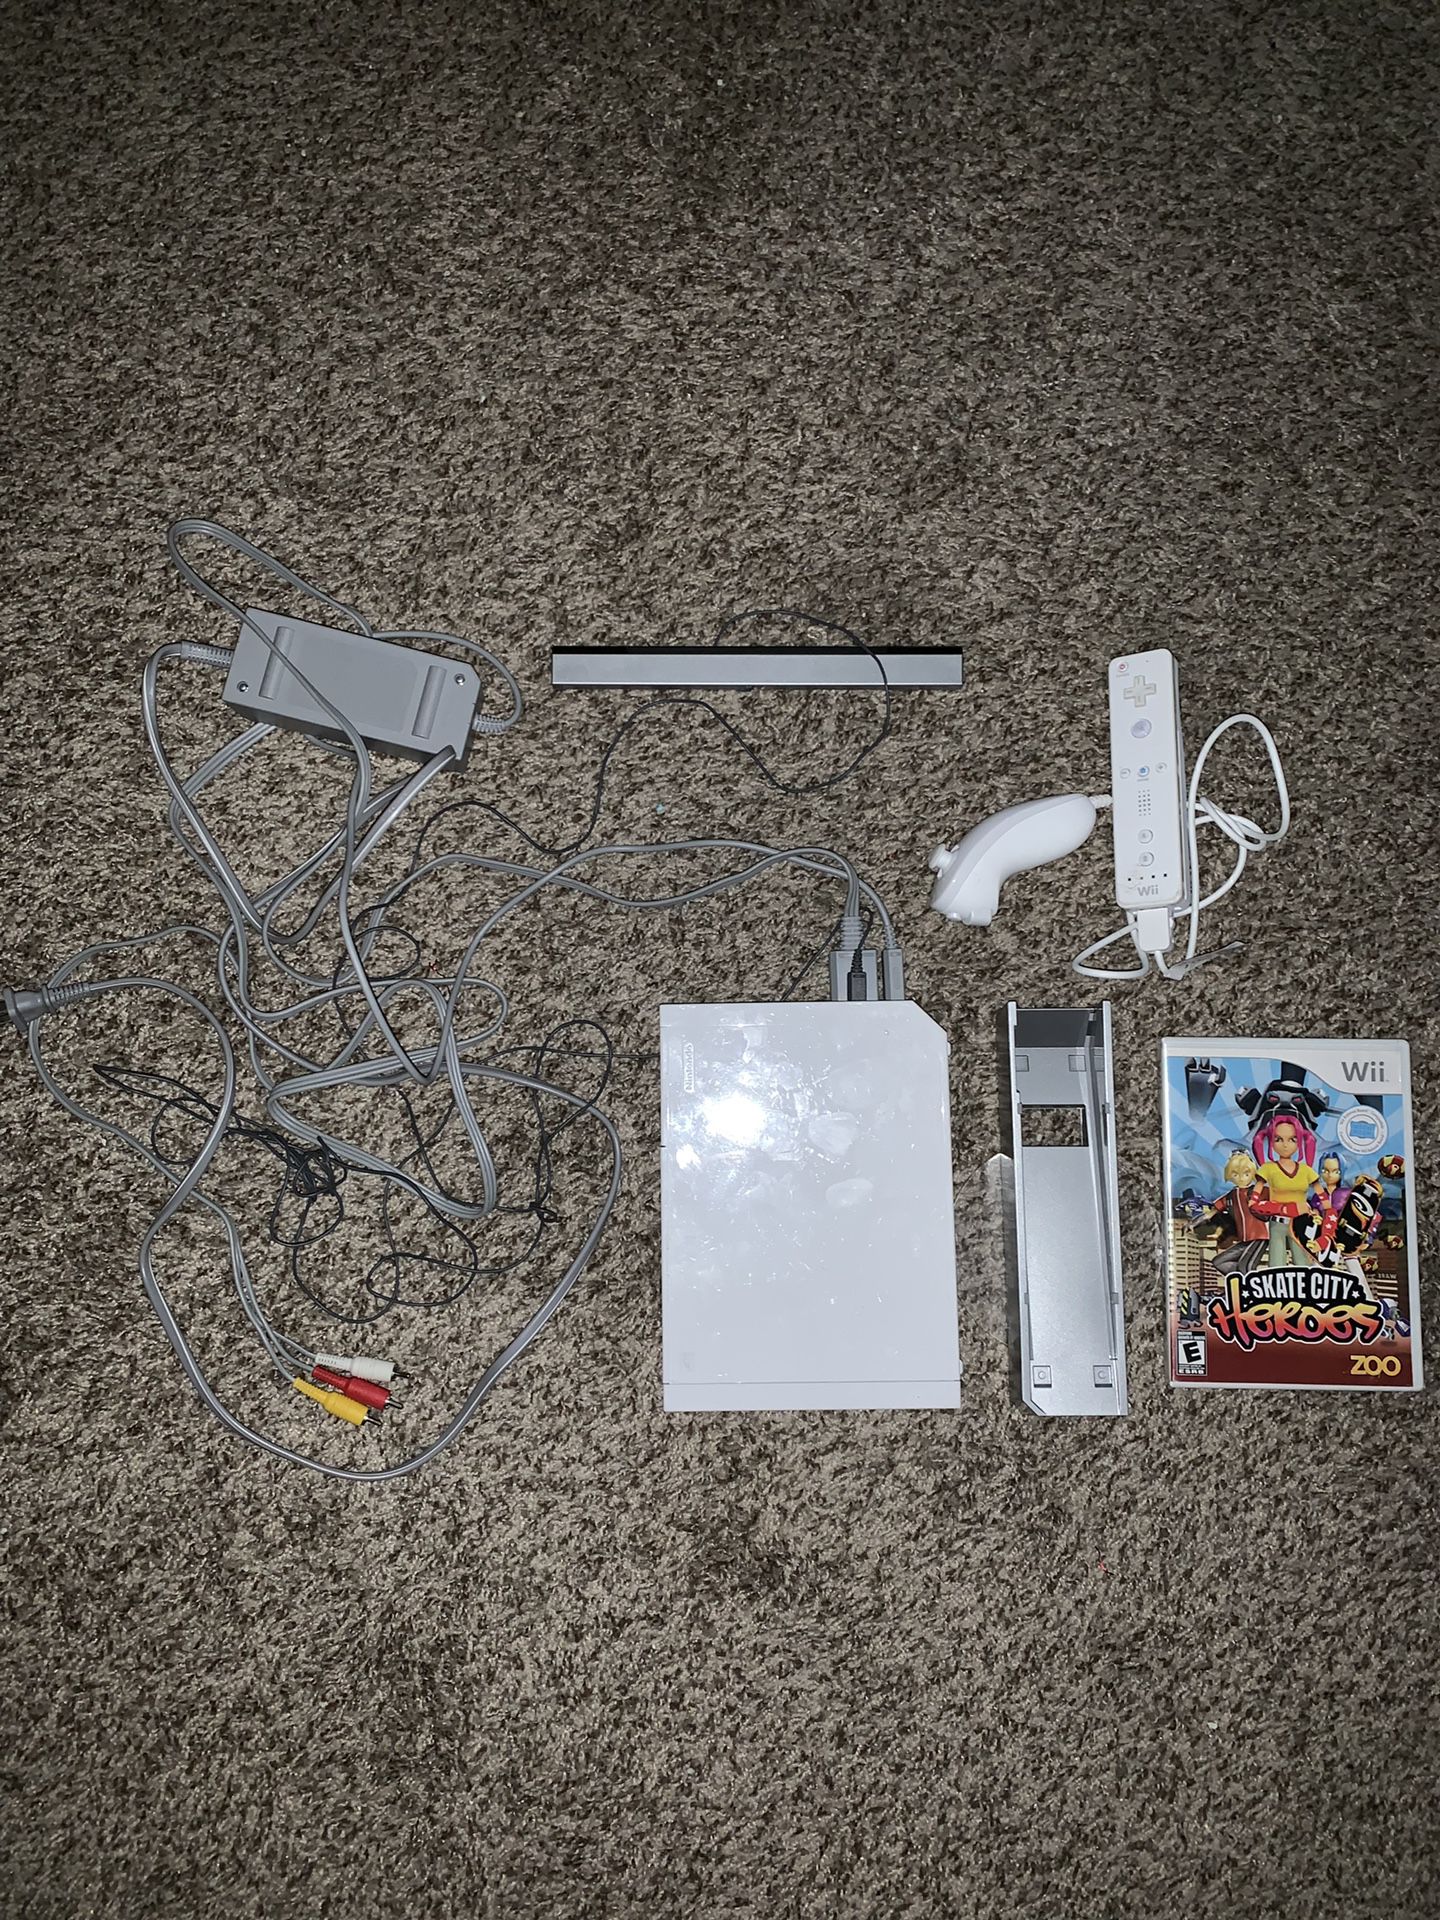 NINTENDO WII CONSOLE SYSTEM WITH ALL CORDS, REMOTE CONTROLLER & VIDEO GAME